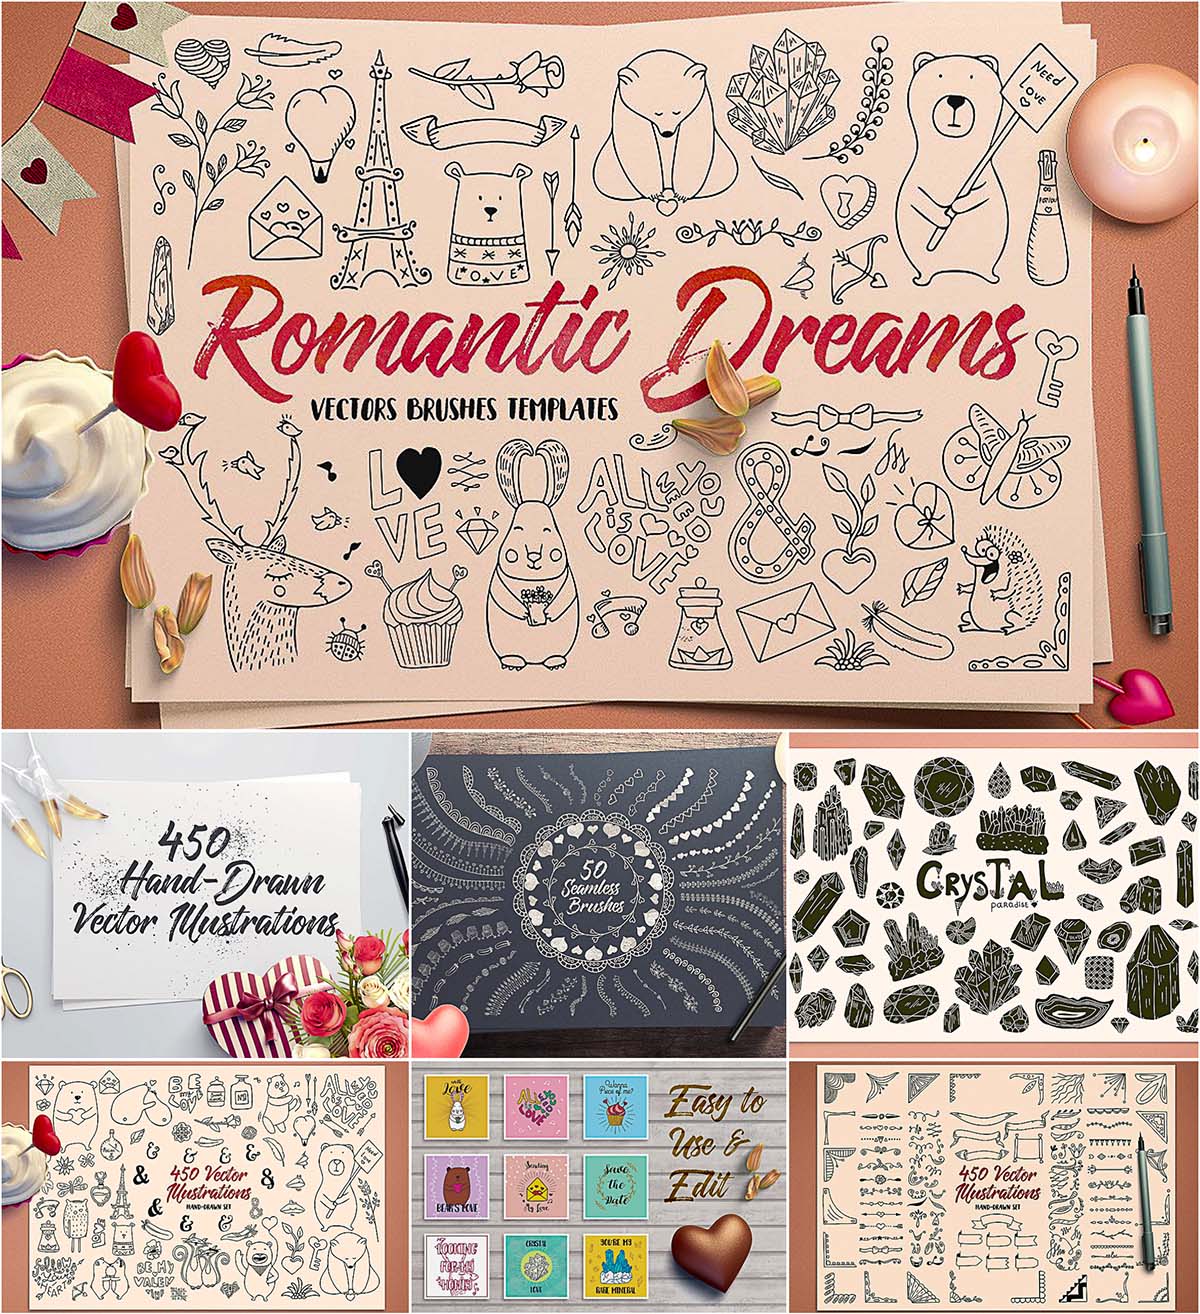 Romantic elements brushes and cards set